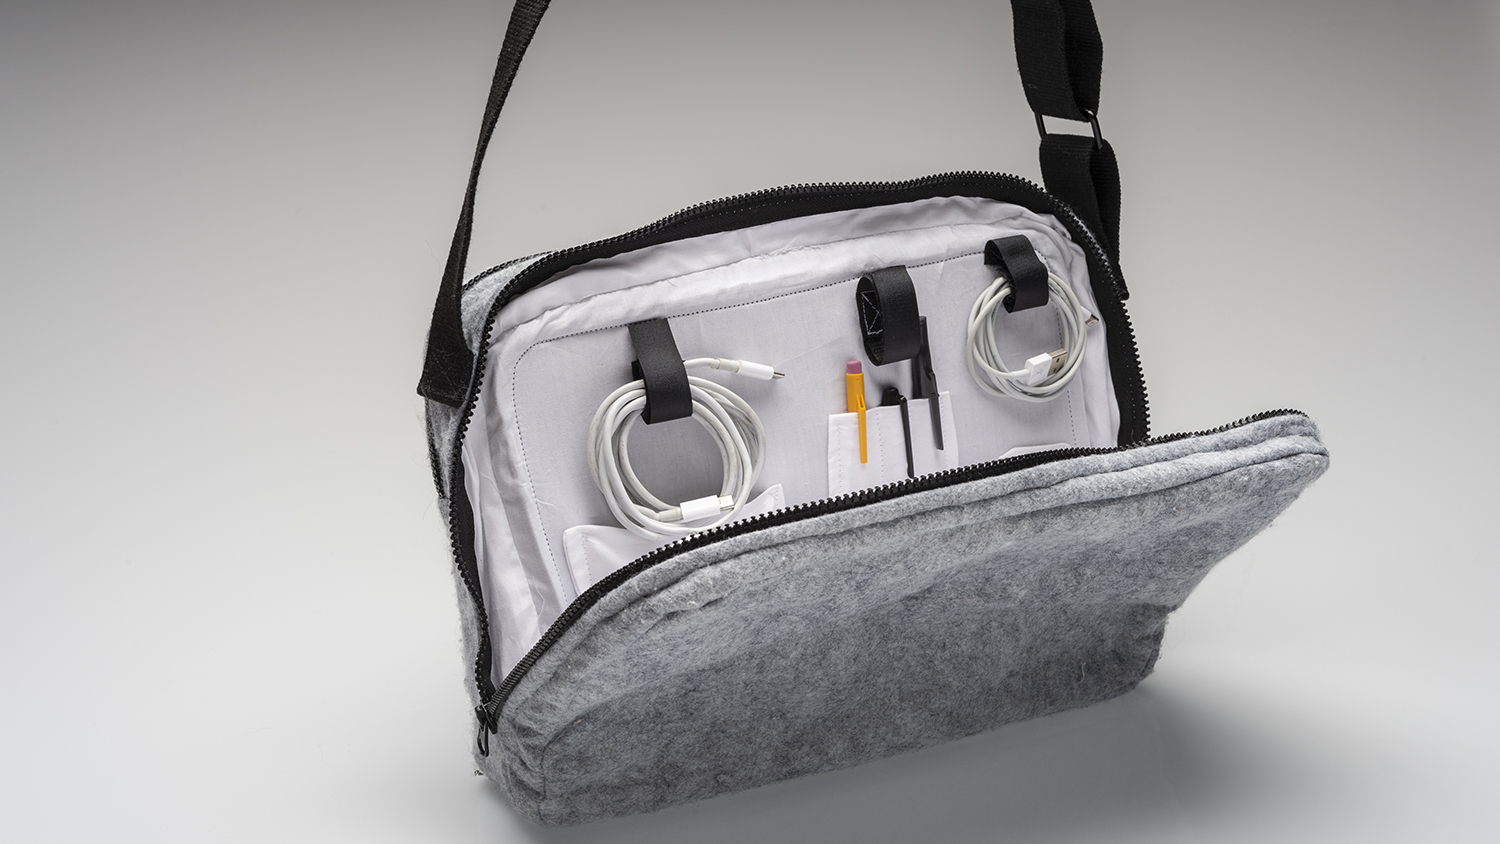 A bag with phone accessories and pens in it. 